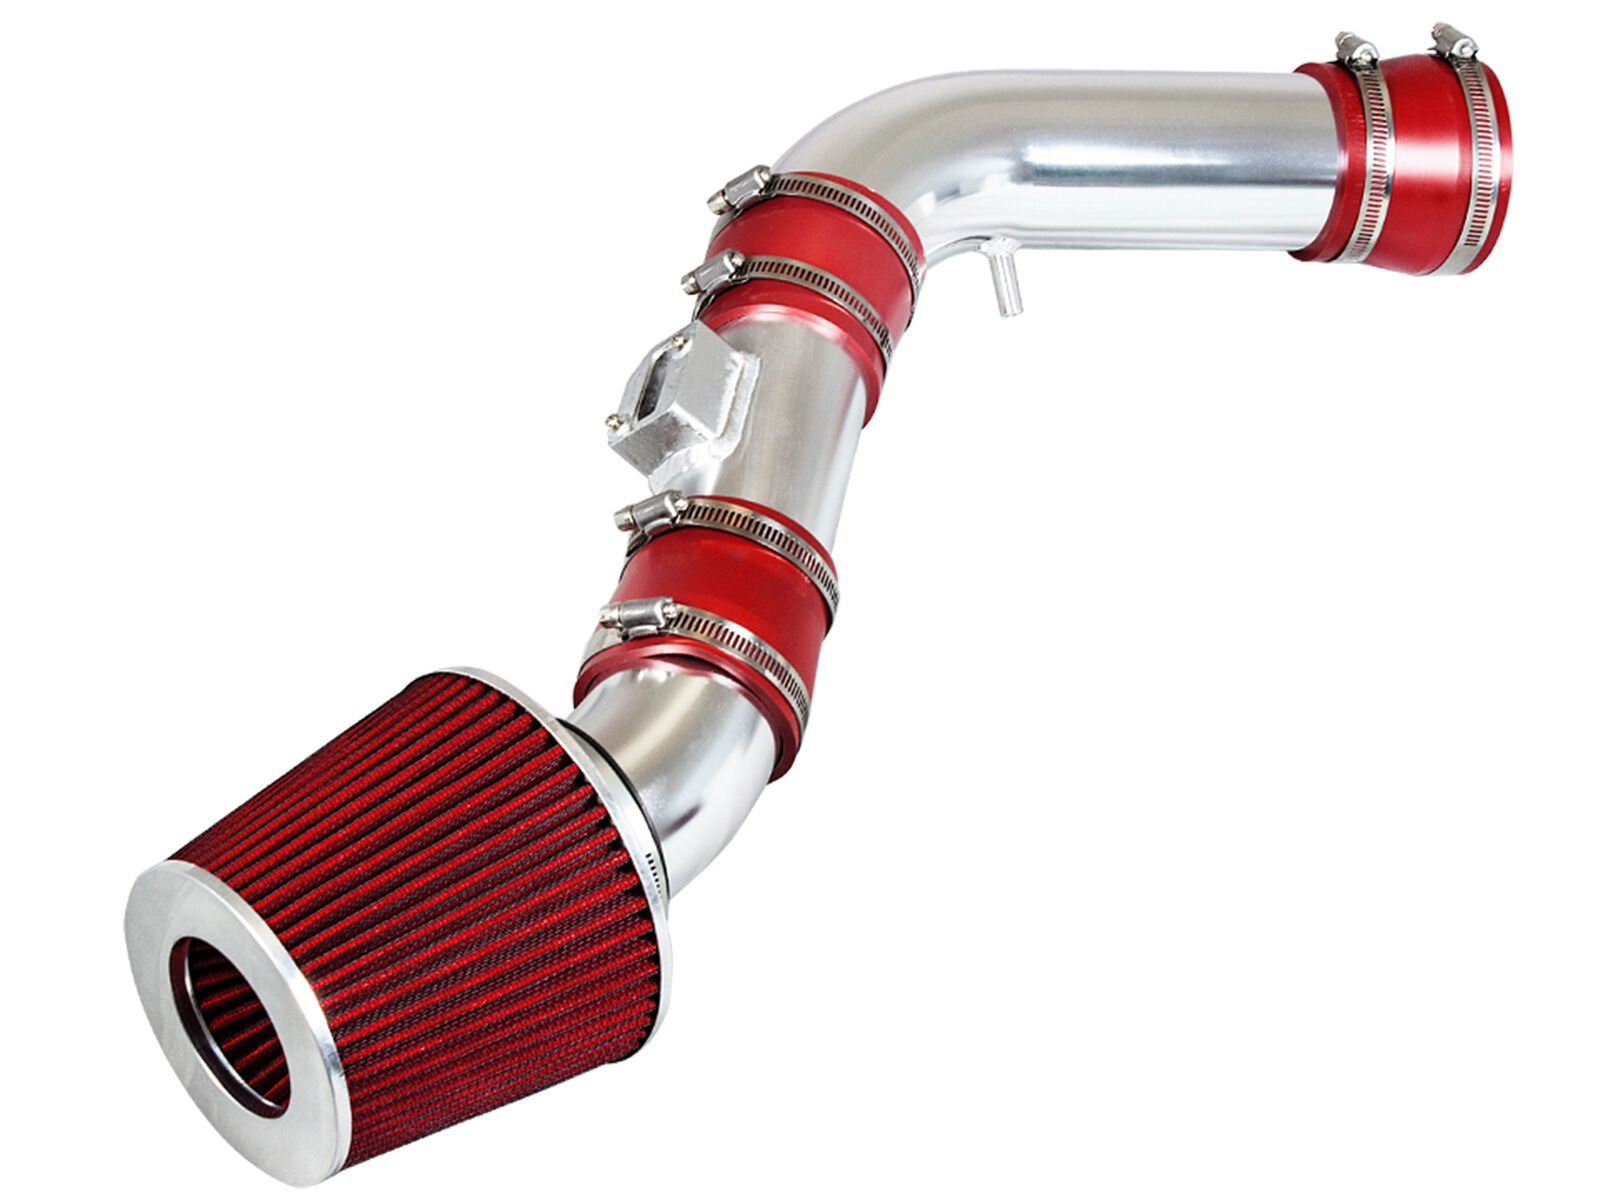 RED Cold air intake kit +Filter For 2007-2012 Colorado/Canyon/H3/H3T 3.7L I5